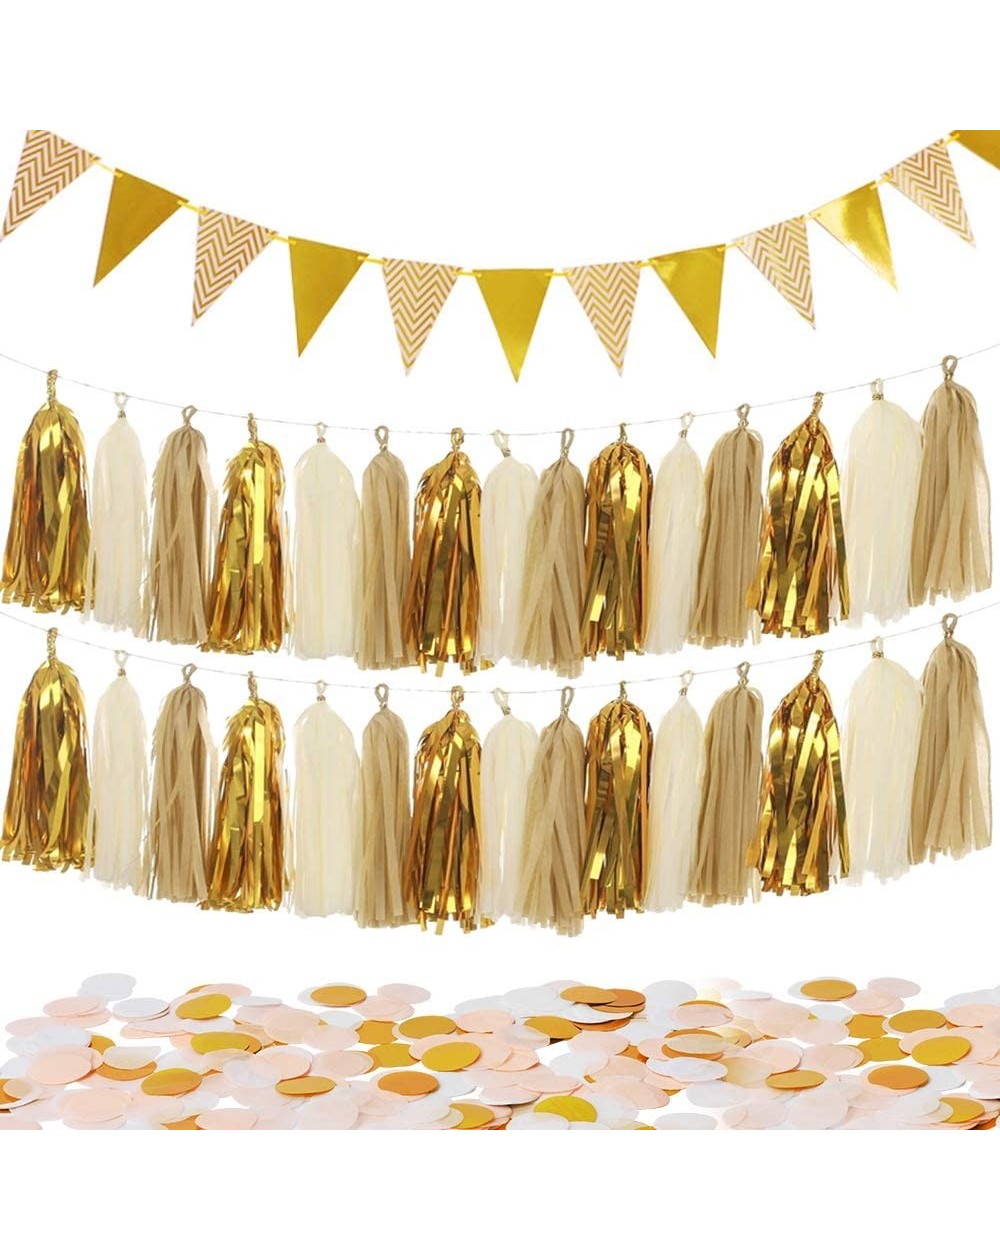 Banners & Garlands Sparkly 30PCS Gold Tassel Garland and 15PCS Paper Pennant Banner Triangle Flags Bunting and 10g Gold Paper...